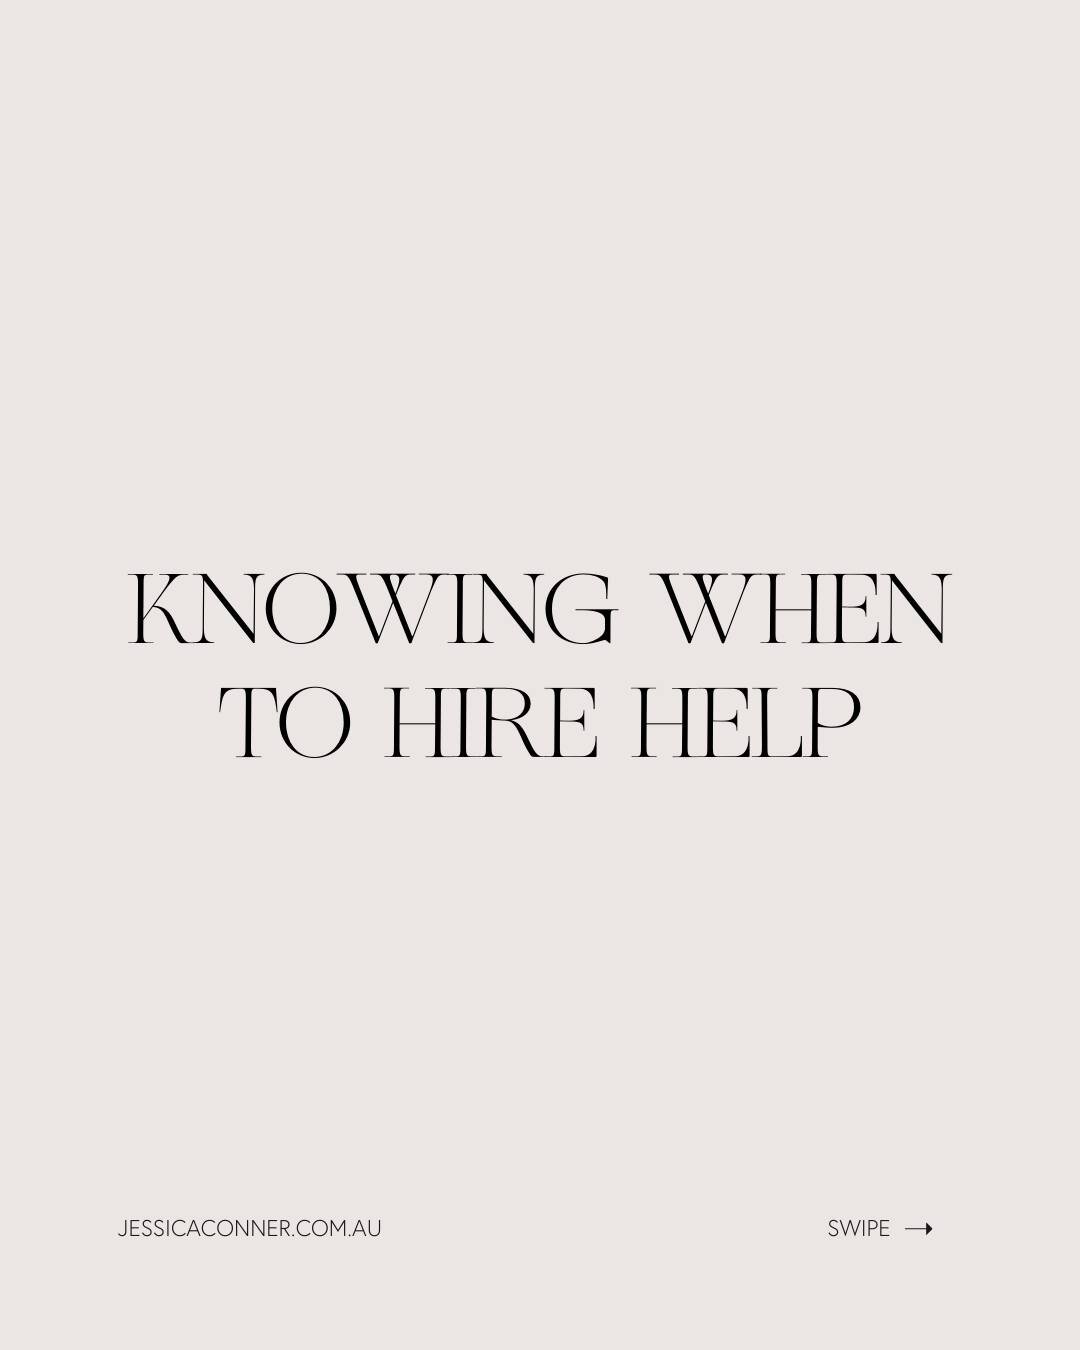 One question often arises among business owners is, 'When is the right time to hire help?'

The answer is simpler than you might think. If you're feeling overwhelmed, if tasks are slipping through the cracks, or if you're spending more time on admini